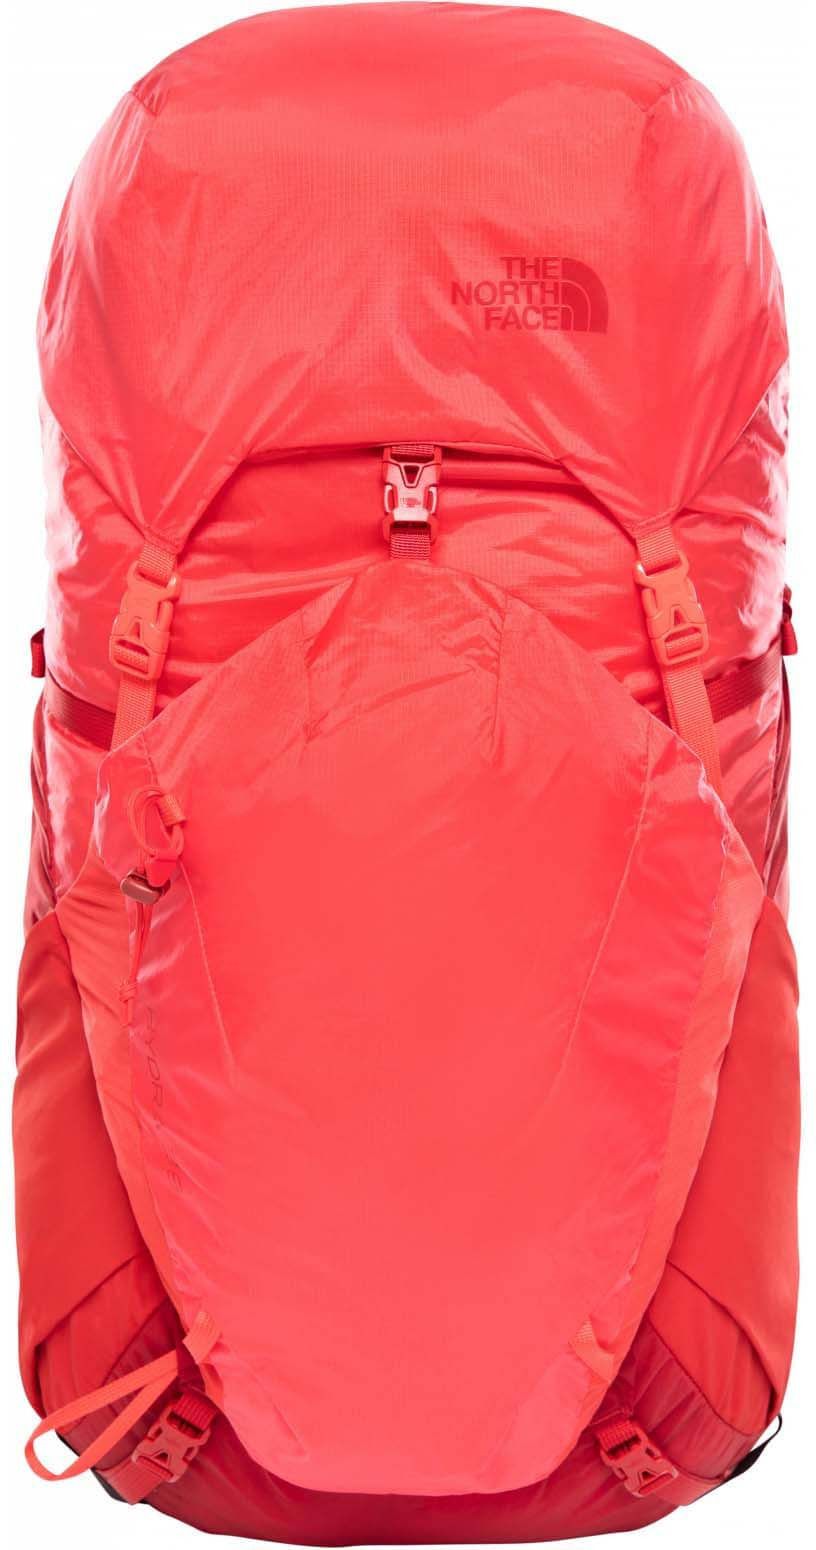  The North Face Hydra, T93KXVAZ8, , 38 